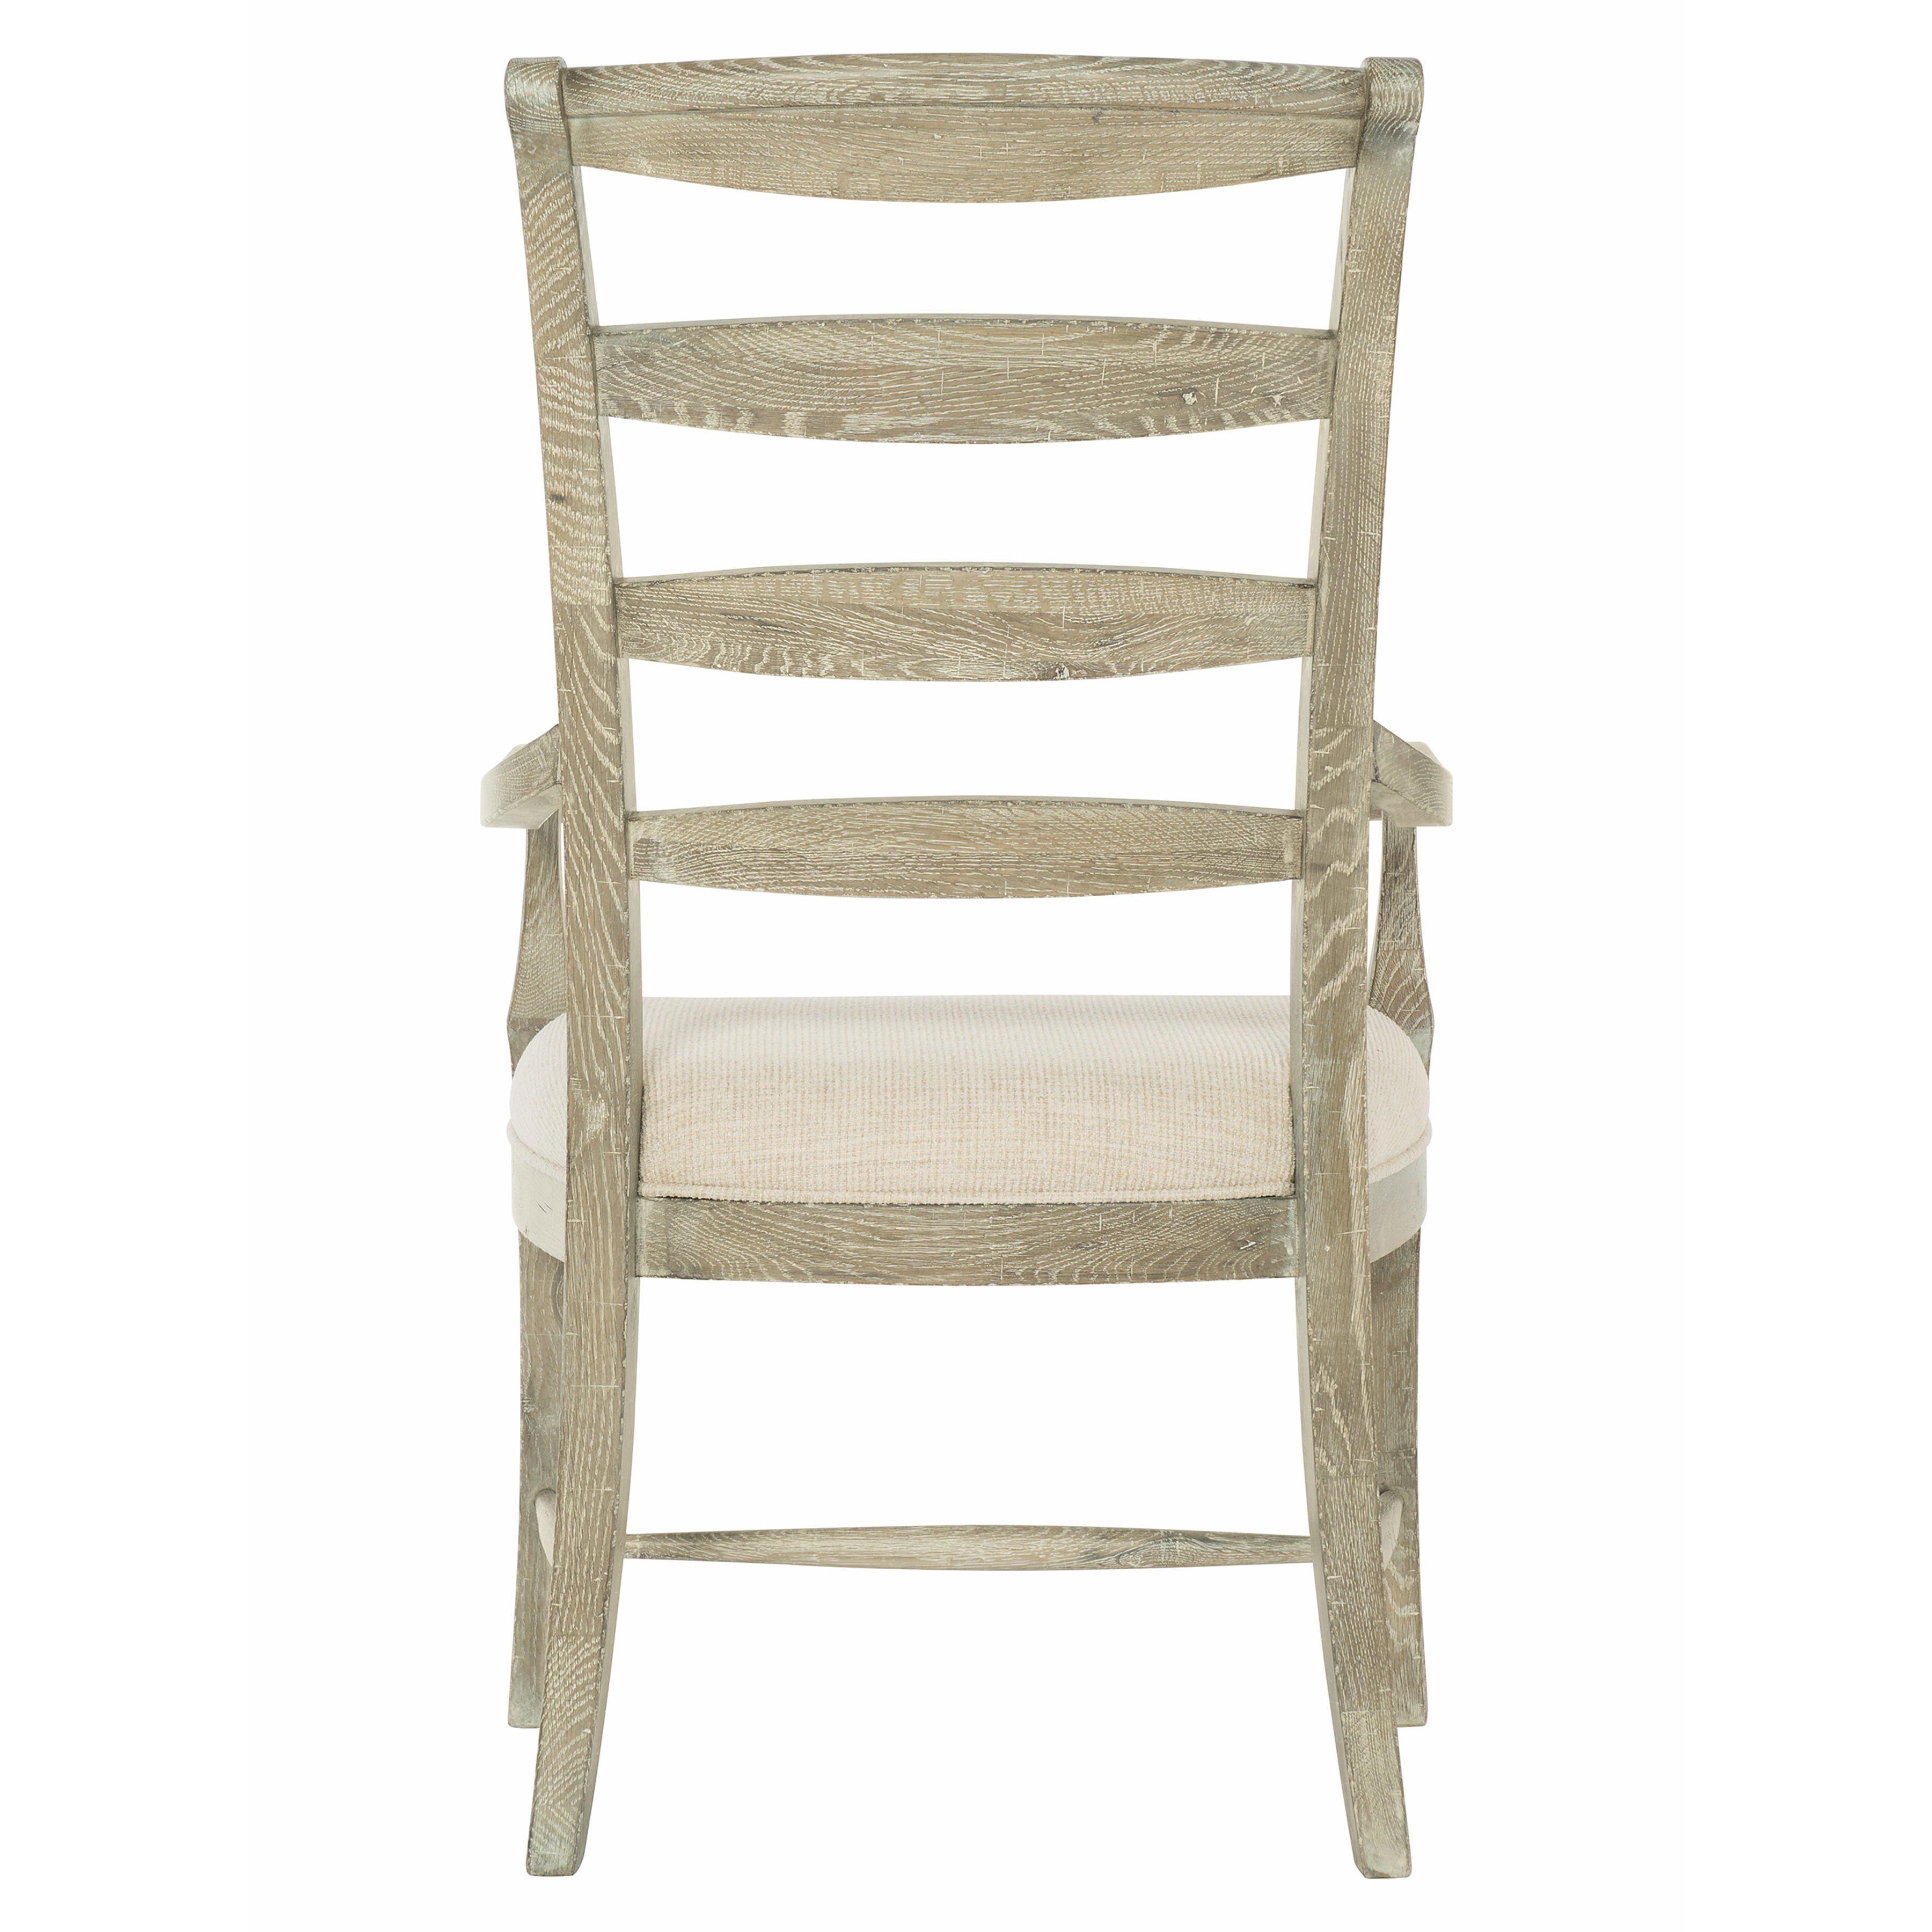 Rustic Patina Ladderback Arm Chair in Sand Finish